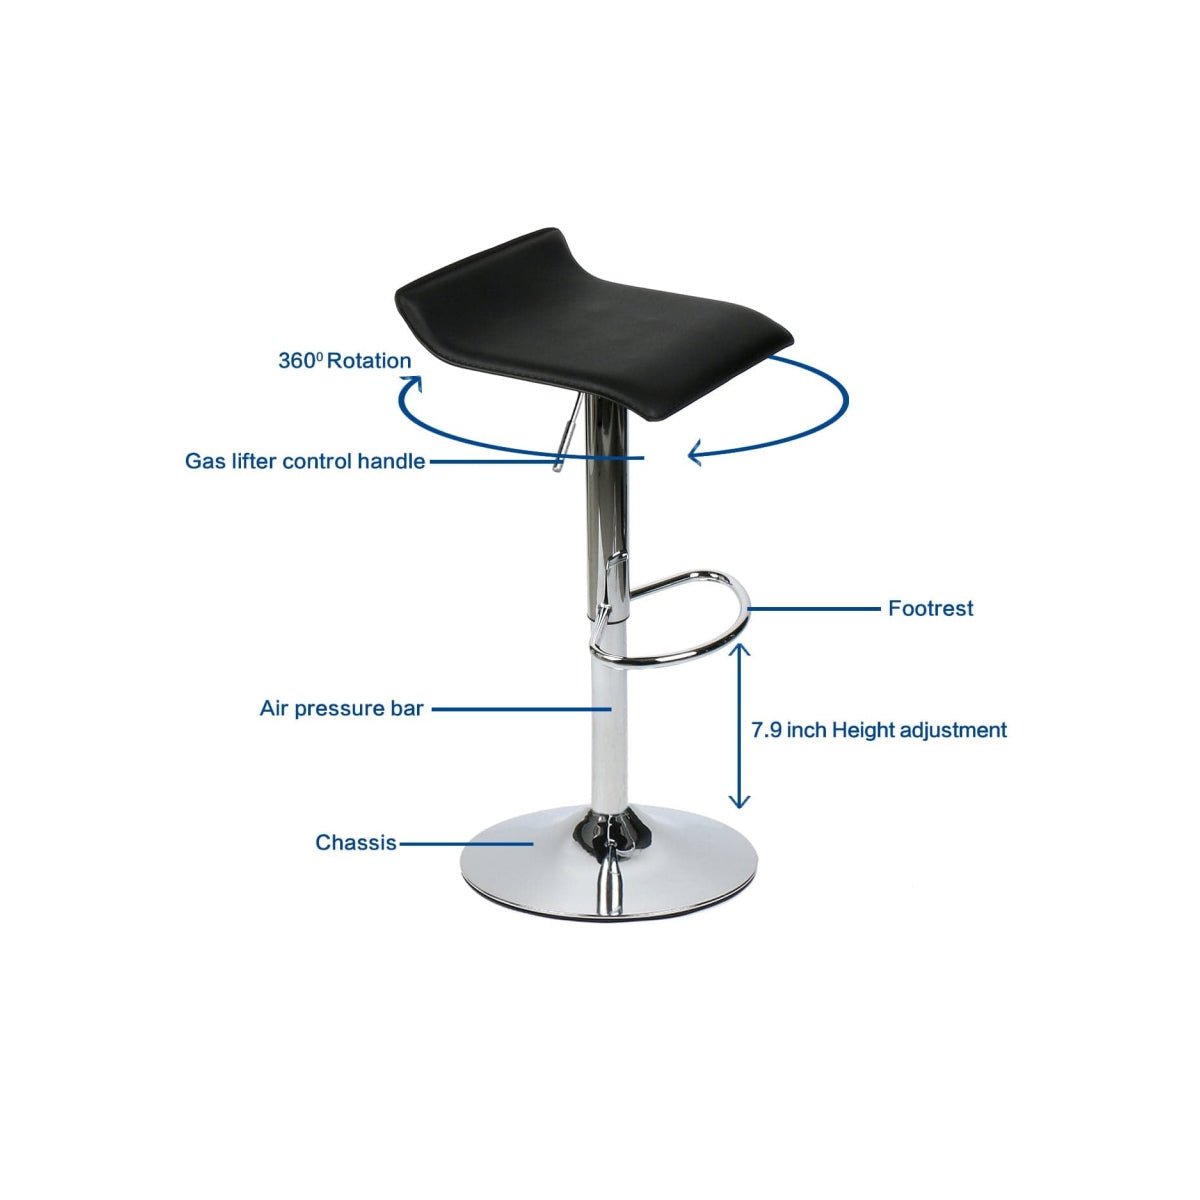 Elecwish black bar stool OW002 features